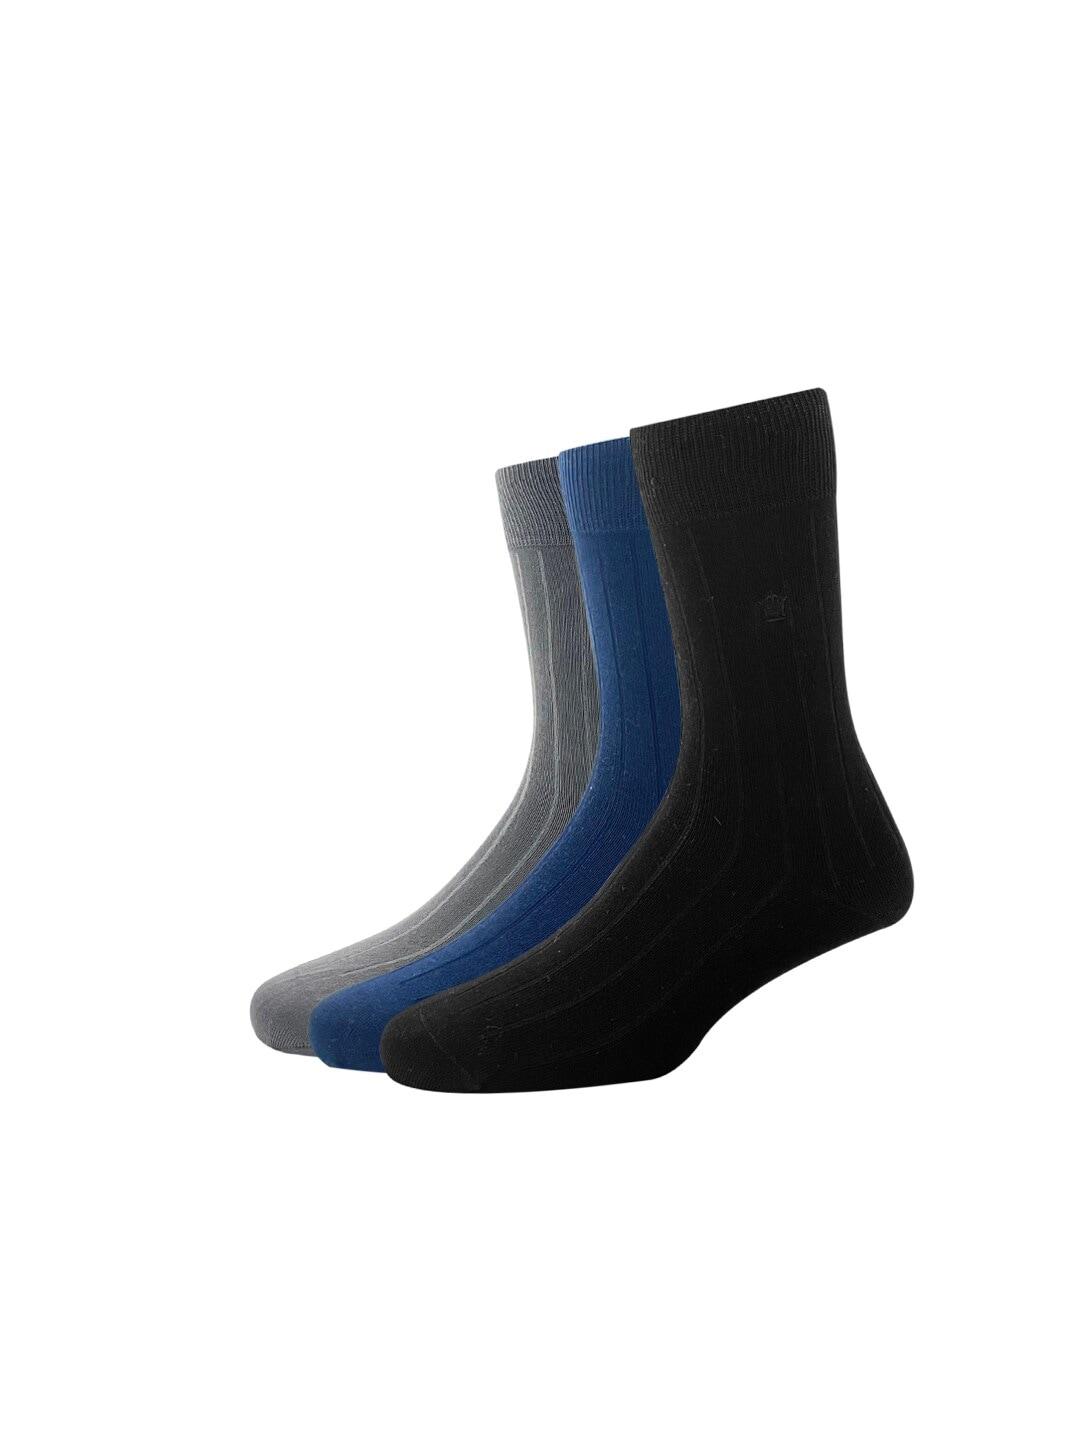 louis philippe men pack of 3 navy blue solid cotton calf length socks